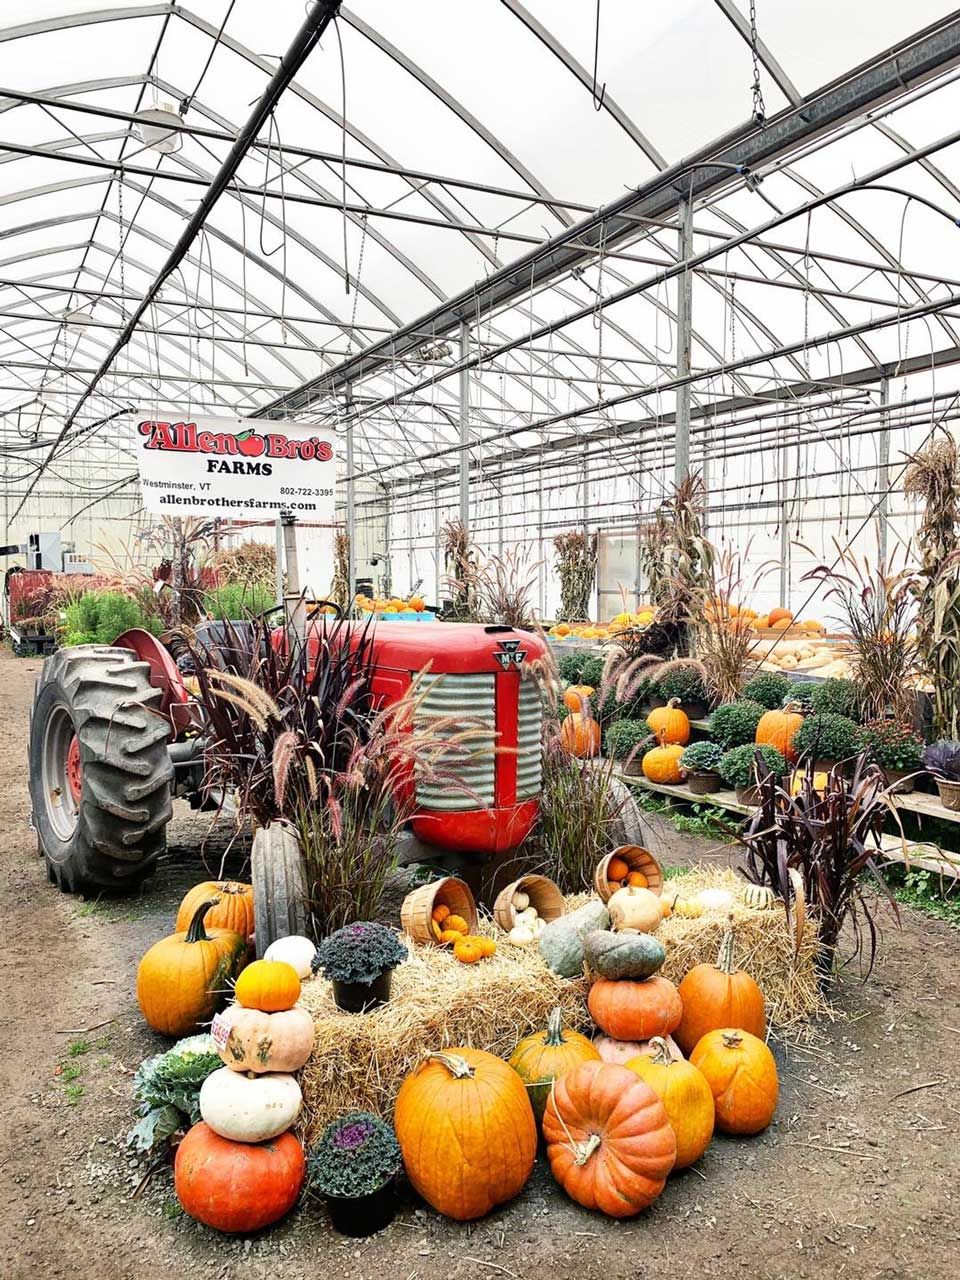 Tractor and pumpkins in a fall display